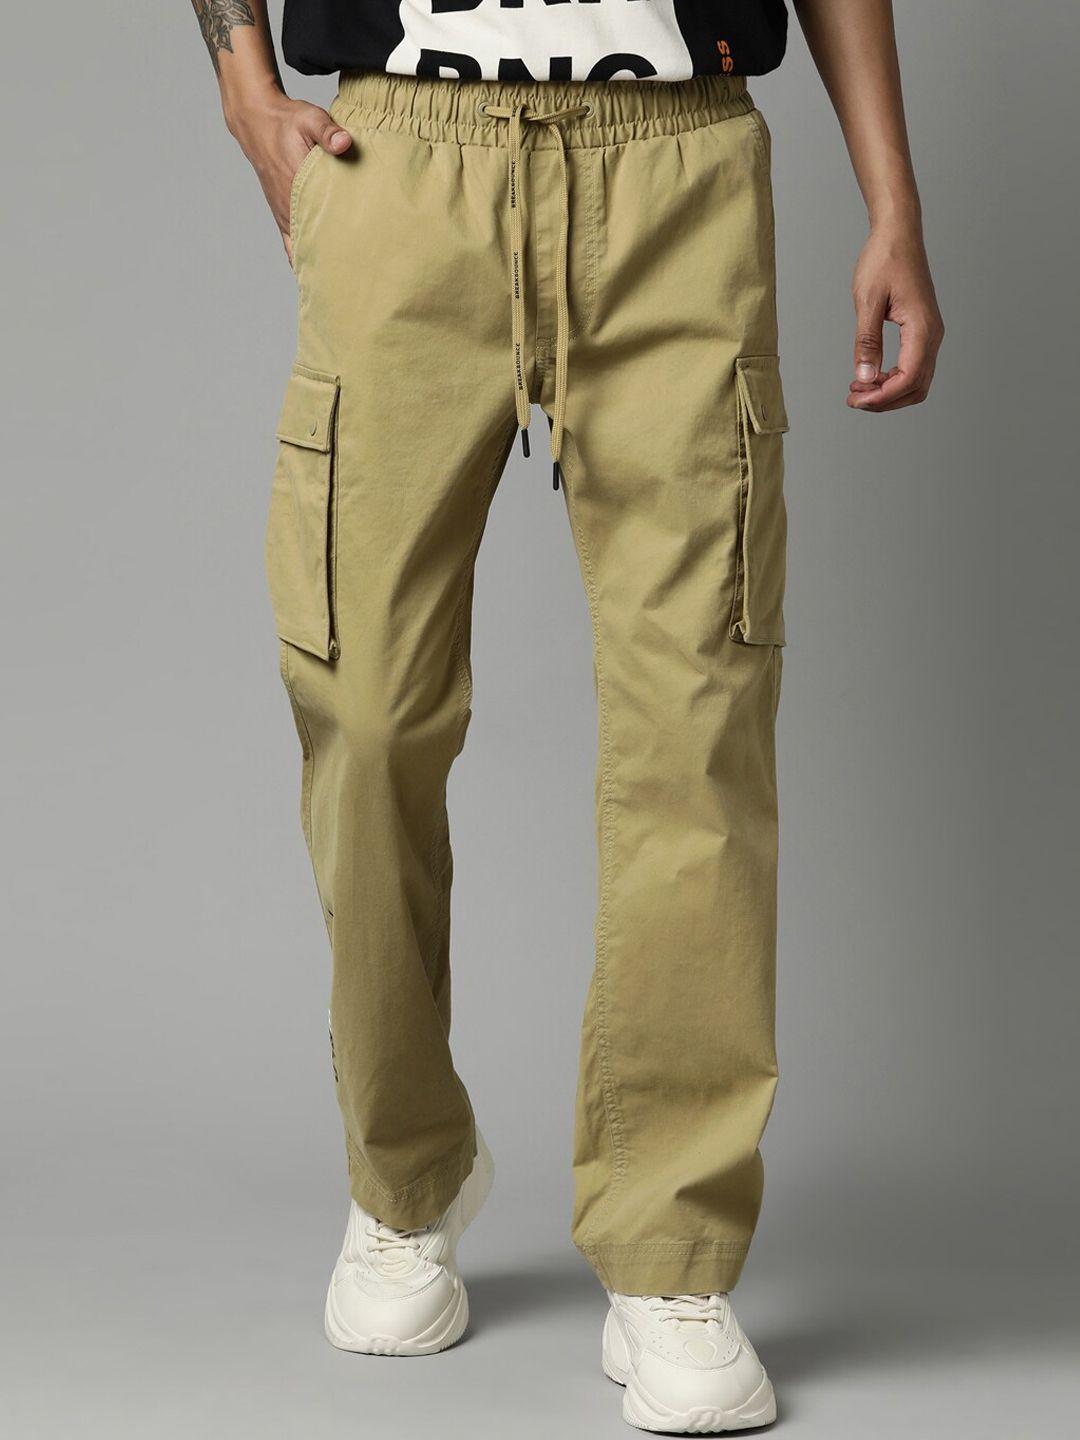 breakbounce-men-khaki-solid-relaxed-straight-leg-straight-fit-cargos-trousers